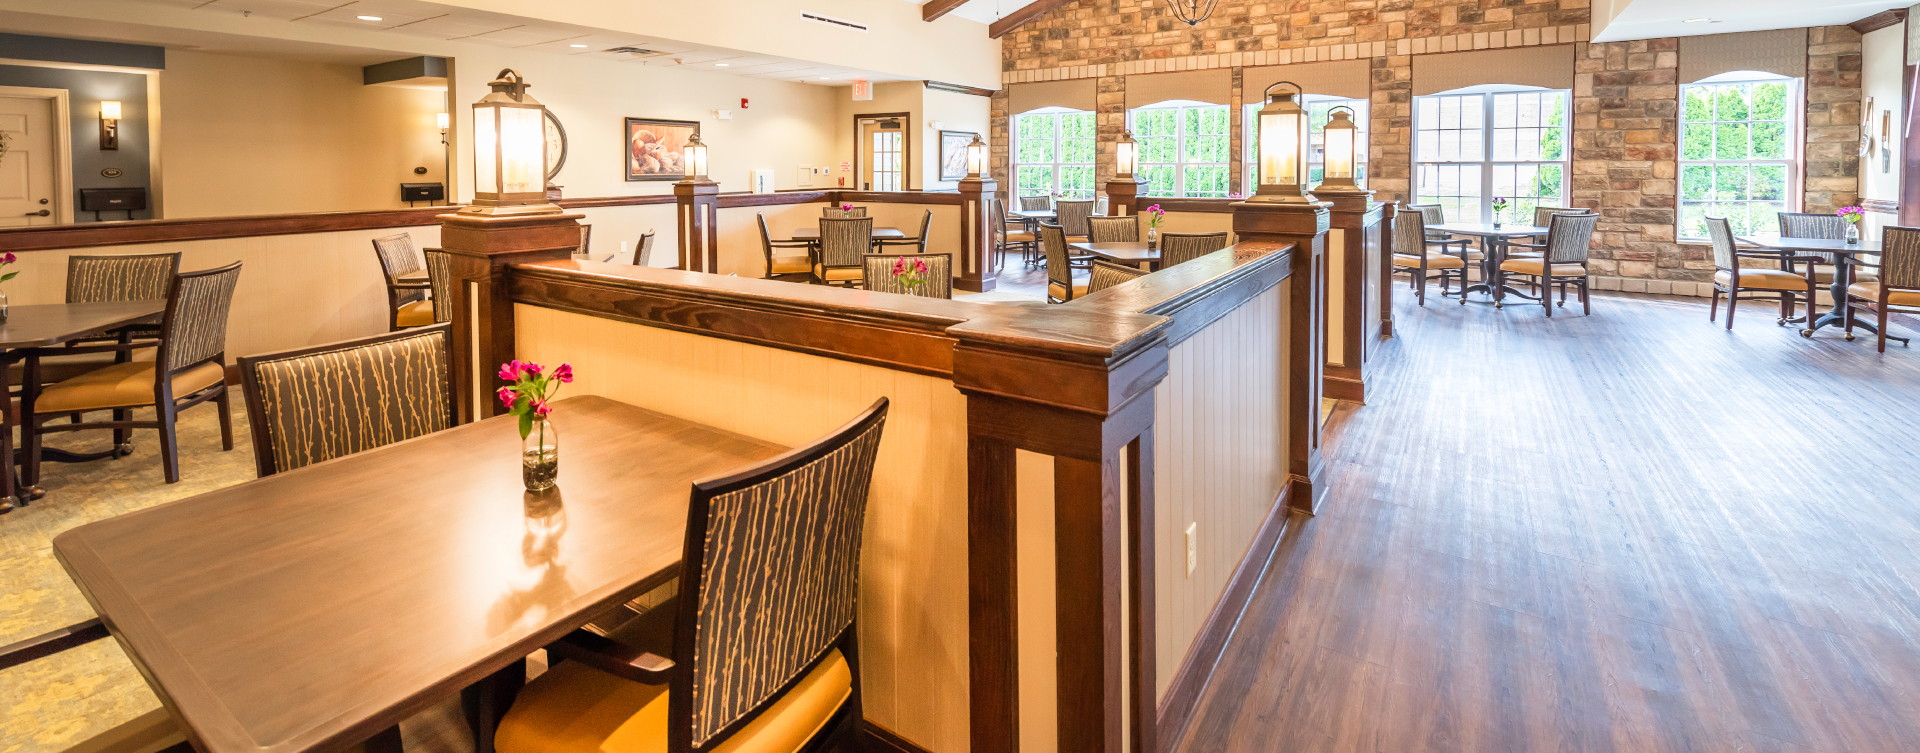 Enjoy homestyle food with made-from-scratch recipes in our dining room at Bickford of Shelby Township